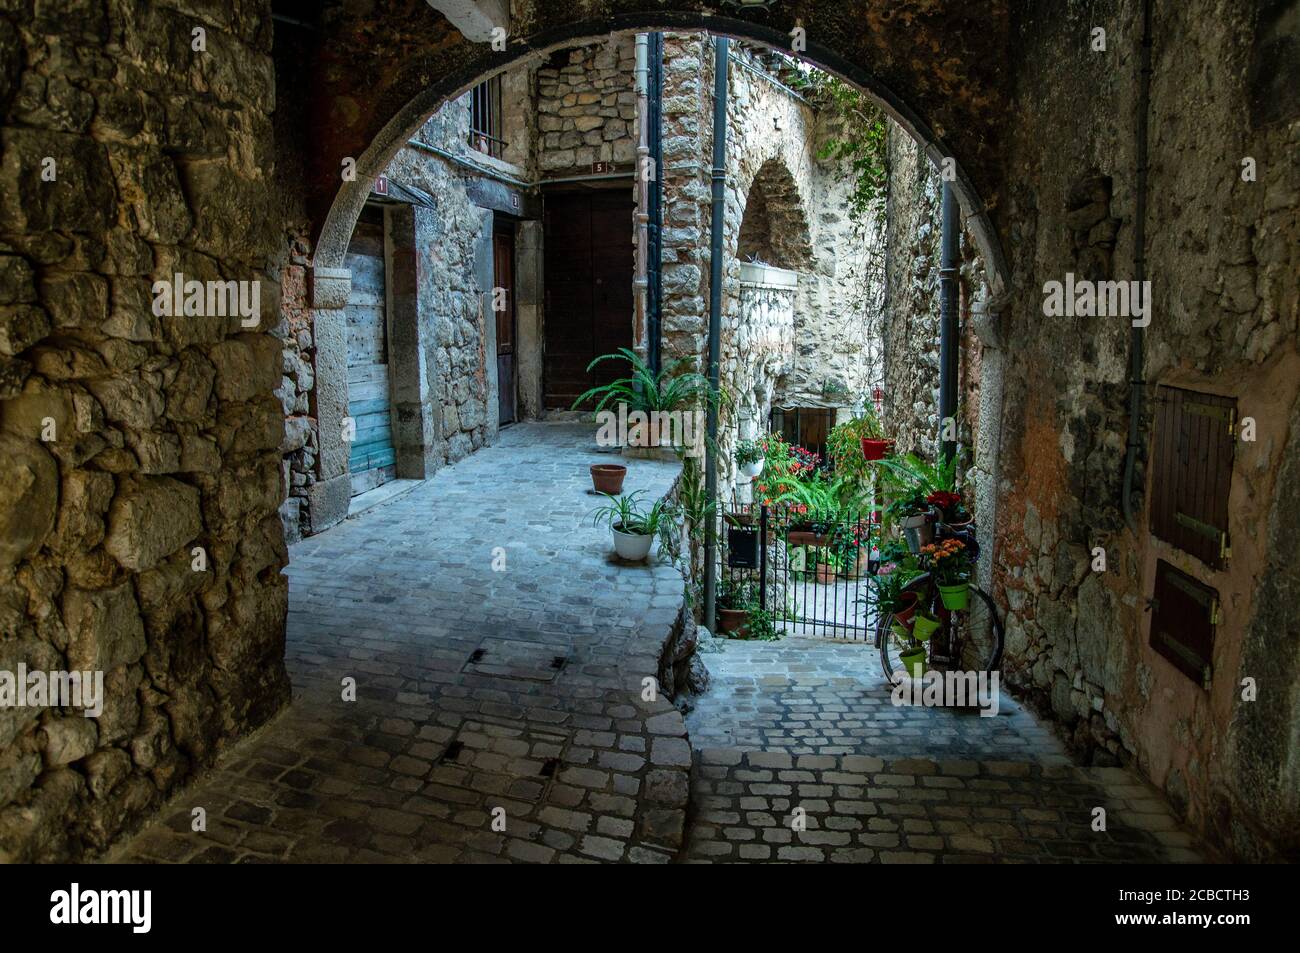 Flowered arch door in a medieval village of France. Tourette sur Loup, French Riviera Stock Photo